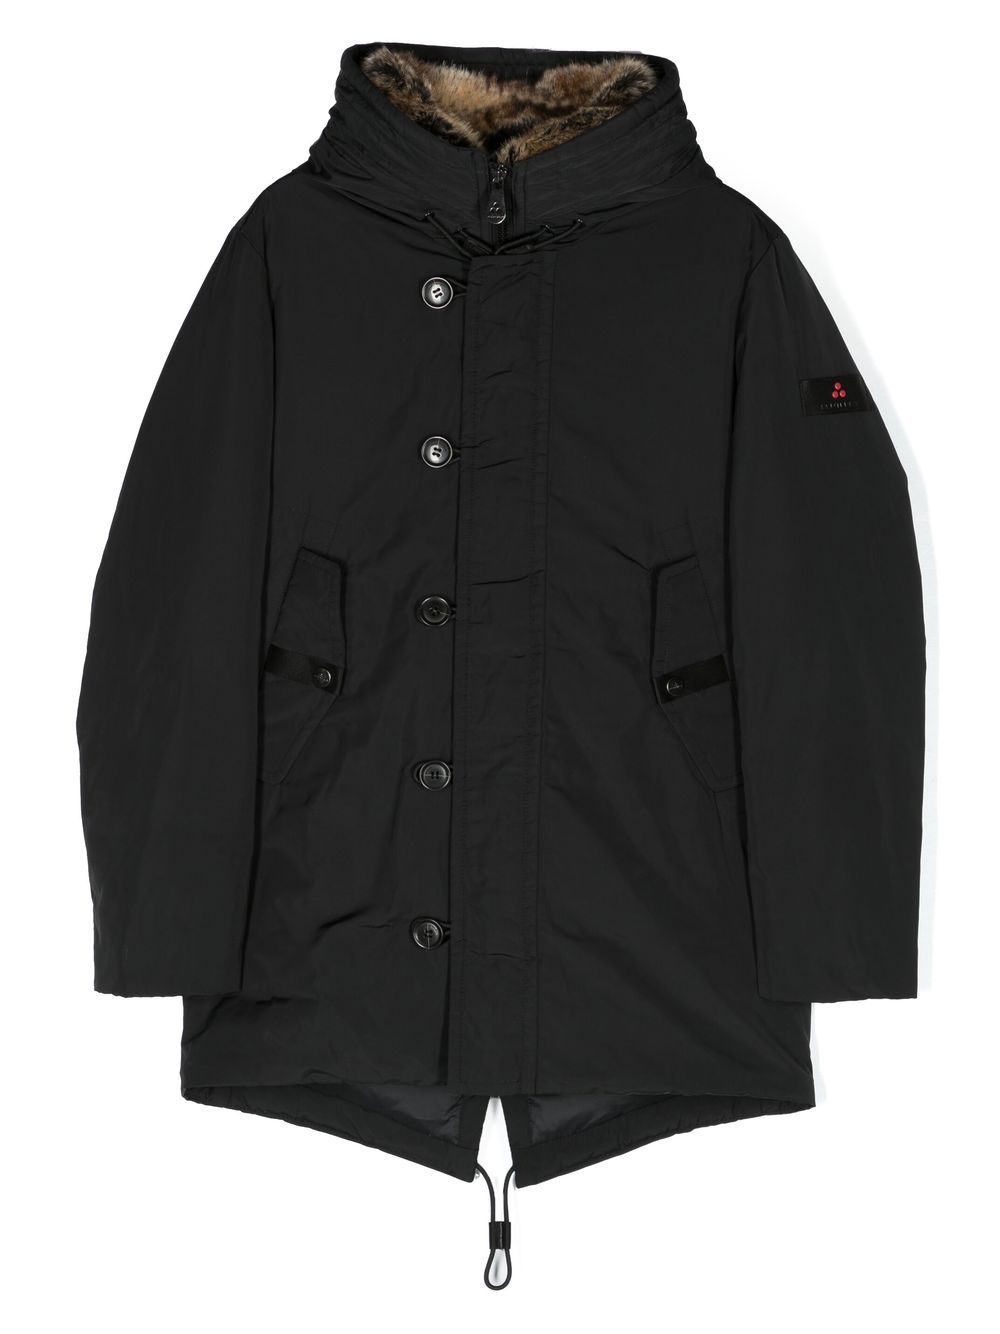 Peuterey button-front hooded jacket - Black